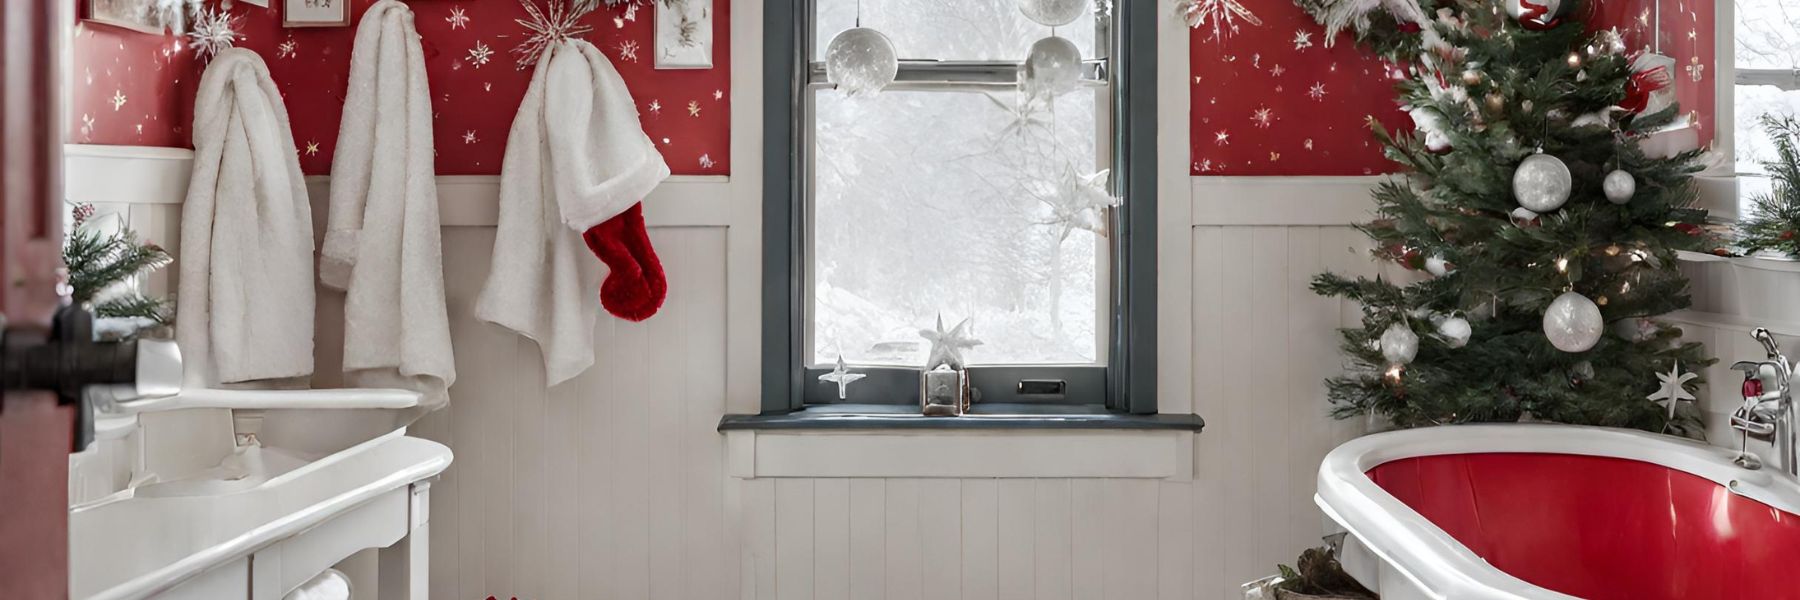 Christmas Decorations for Bathrooms: Top Ideas for Holidays to Come